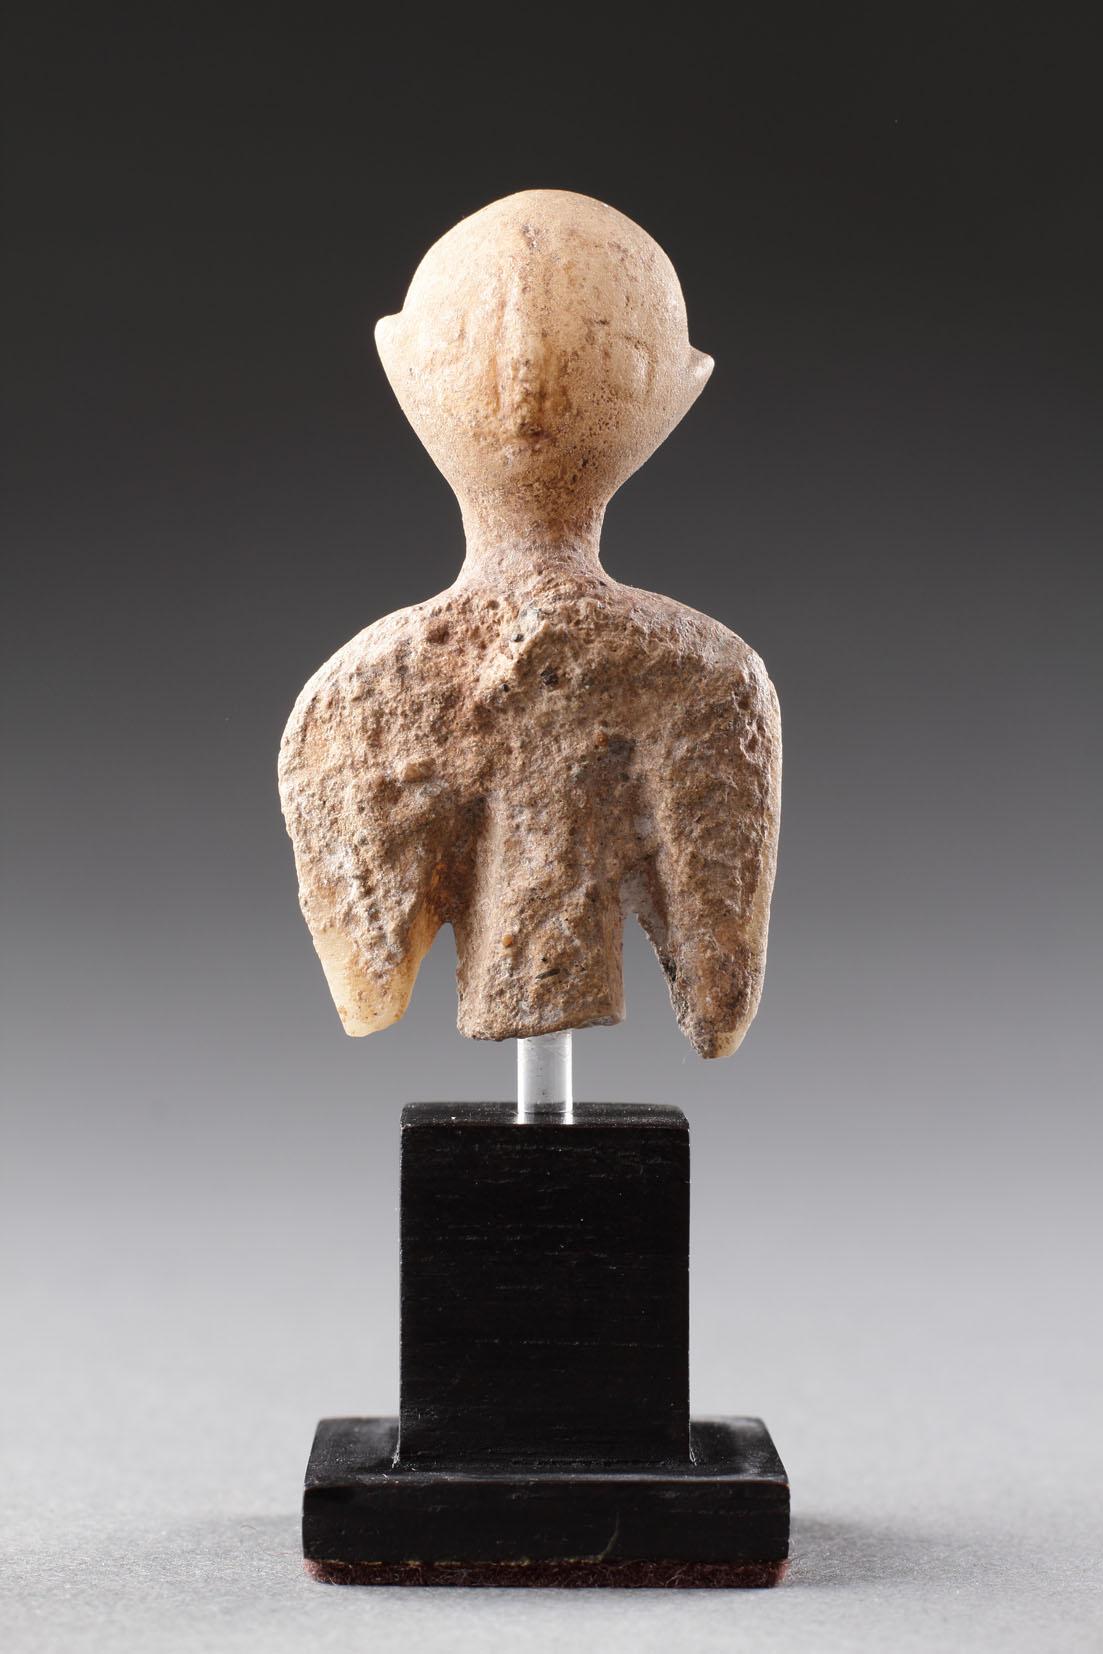 An Anatolian Marble ‘Star Gazer’ Figure
Marble
Anatolian
Early Bronze Age / Circa 2700 - 2100 BC

Size: 5cm high, 3cm wide - 2 ins high, 1¼ ins high

The highly stylised oval head with two small ears and long nasal ridge leans slightly back. A short